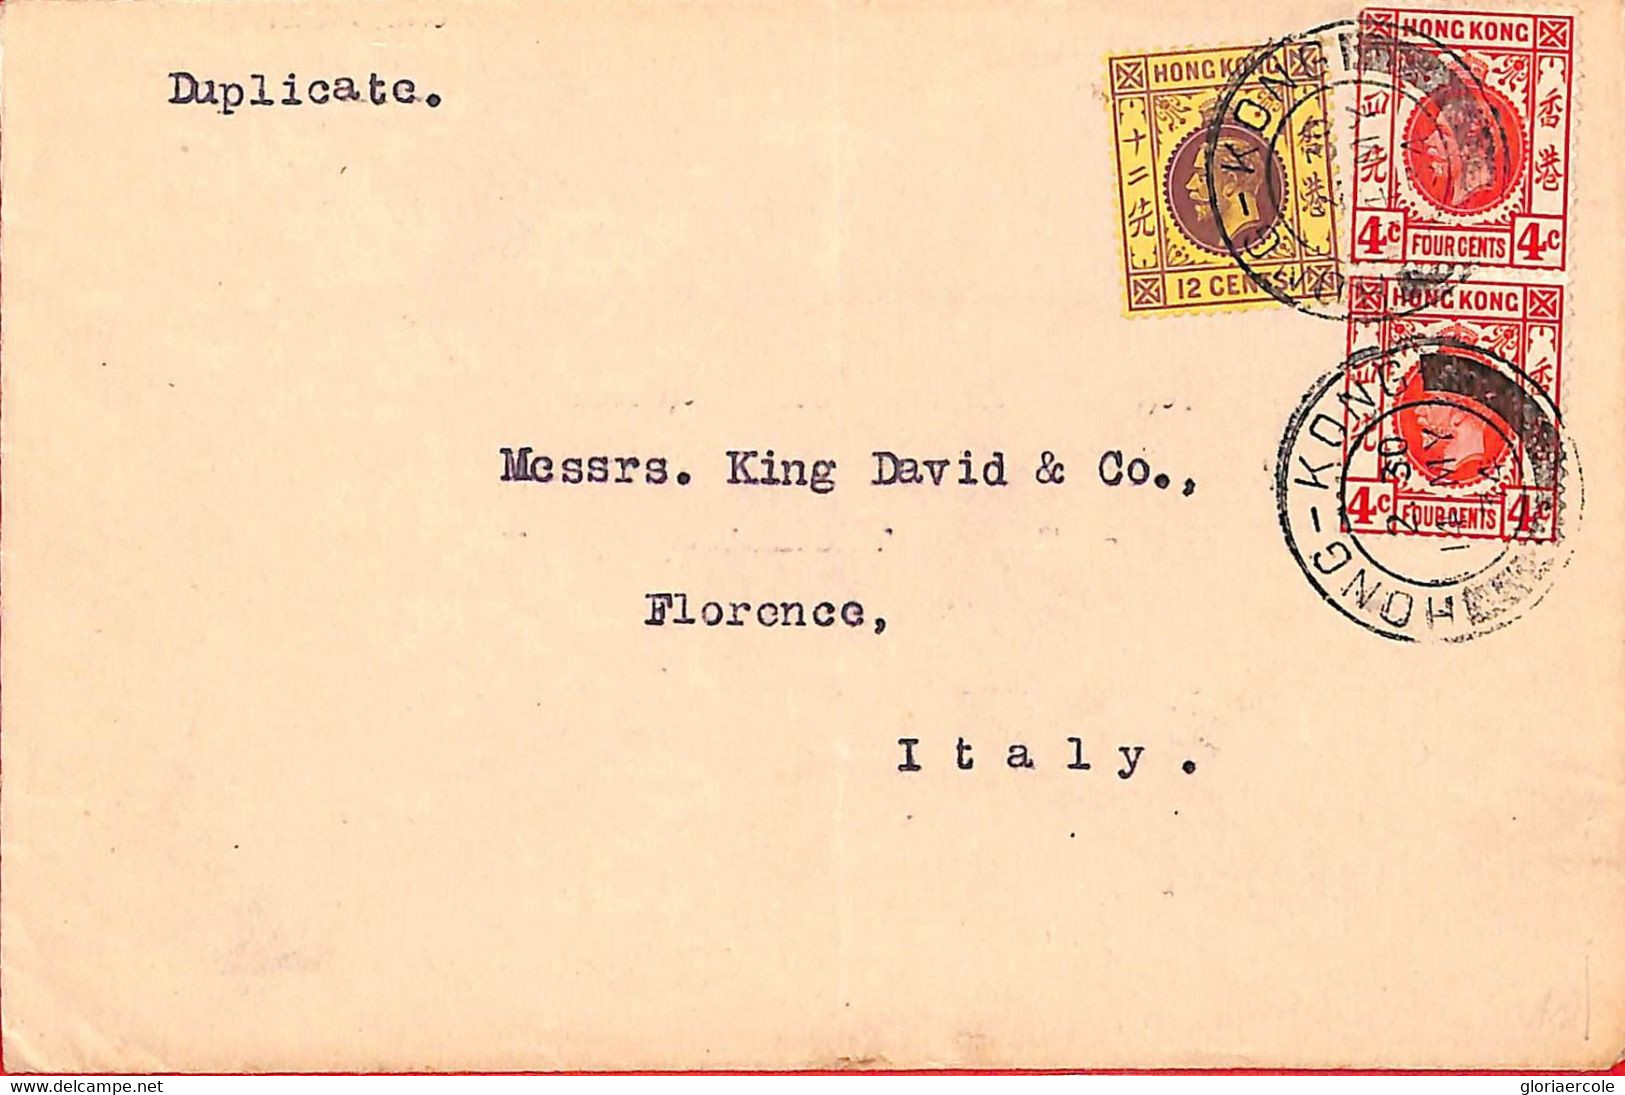 Aa6770 - HONG KONG - POSTAL HISTORY -  COVER To ITALY  1934 - Covers & Documents